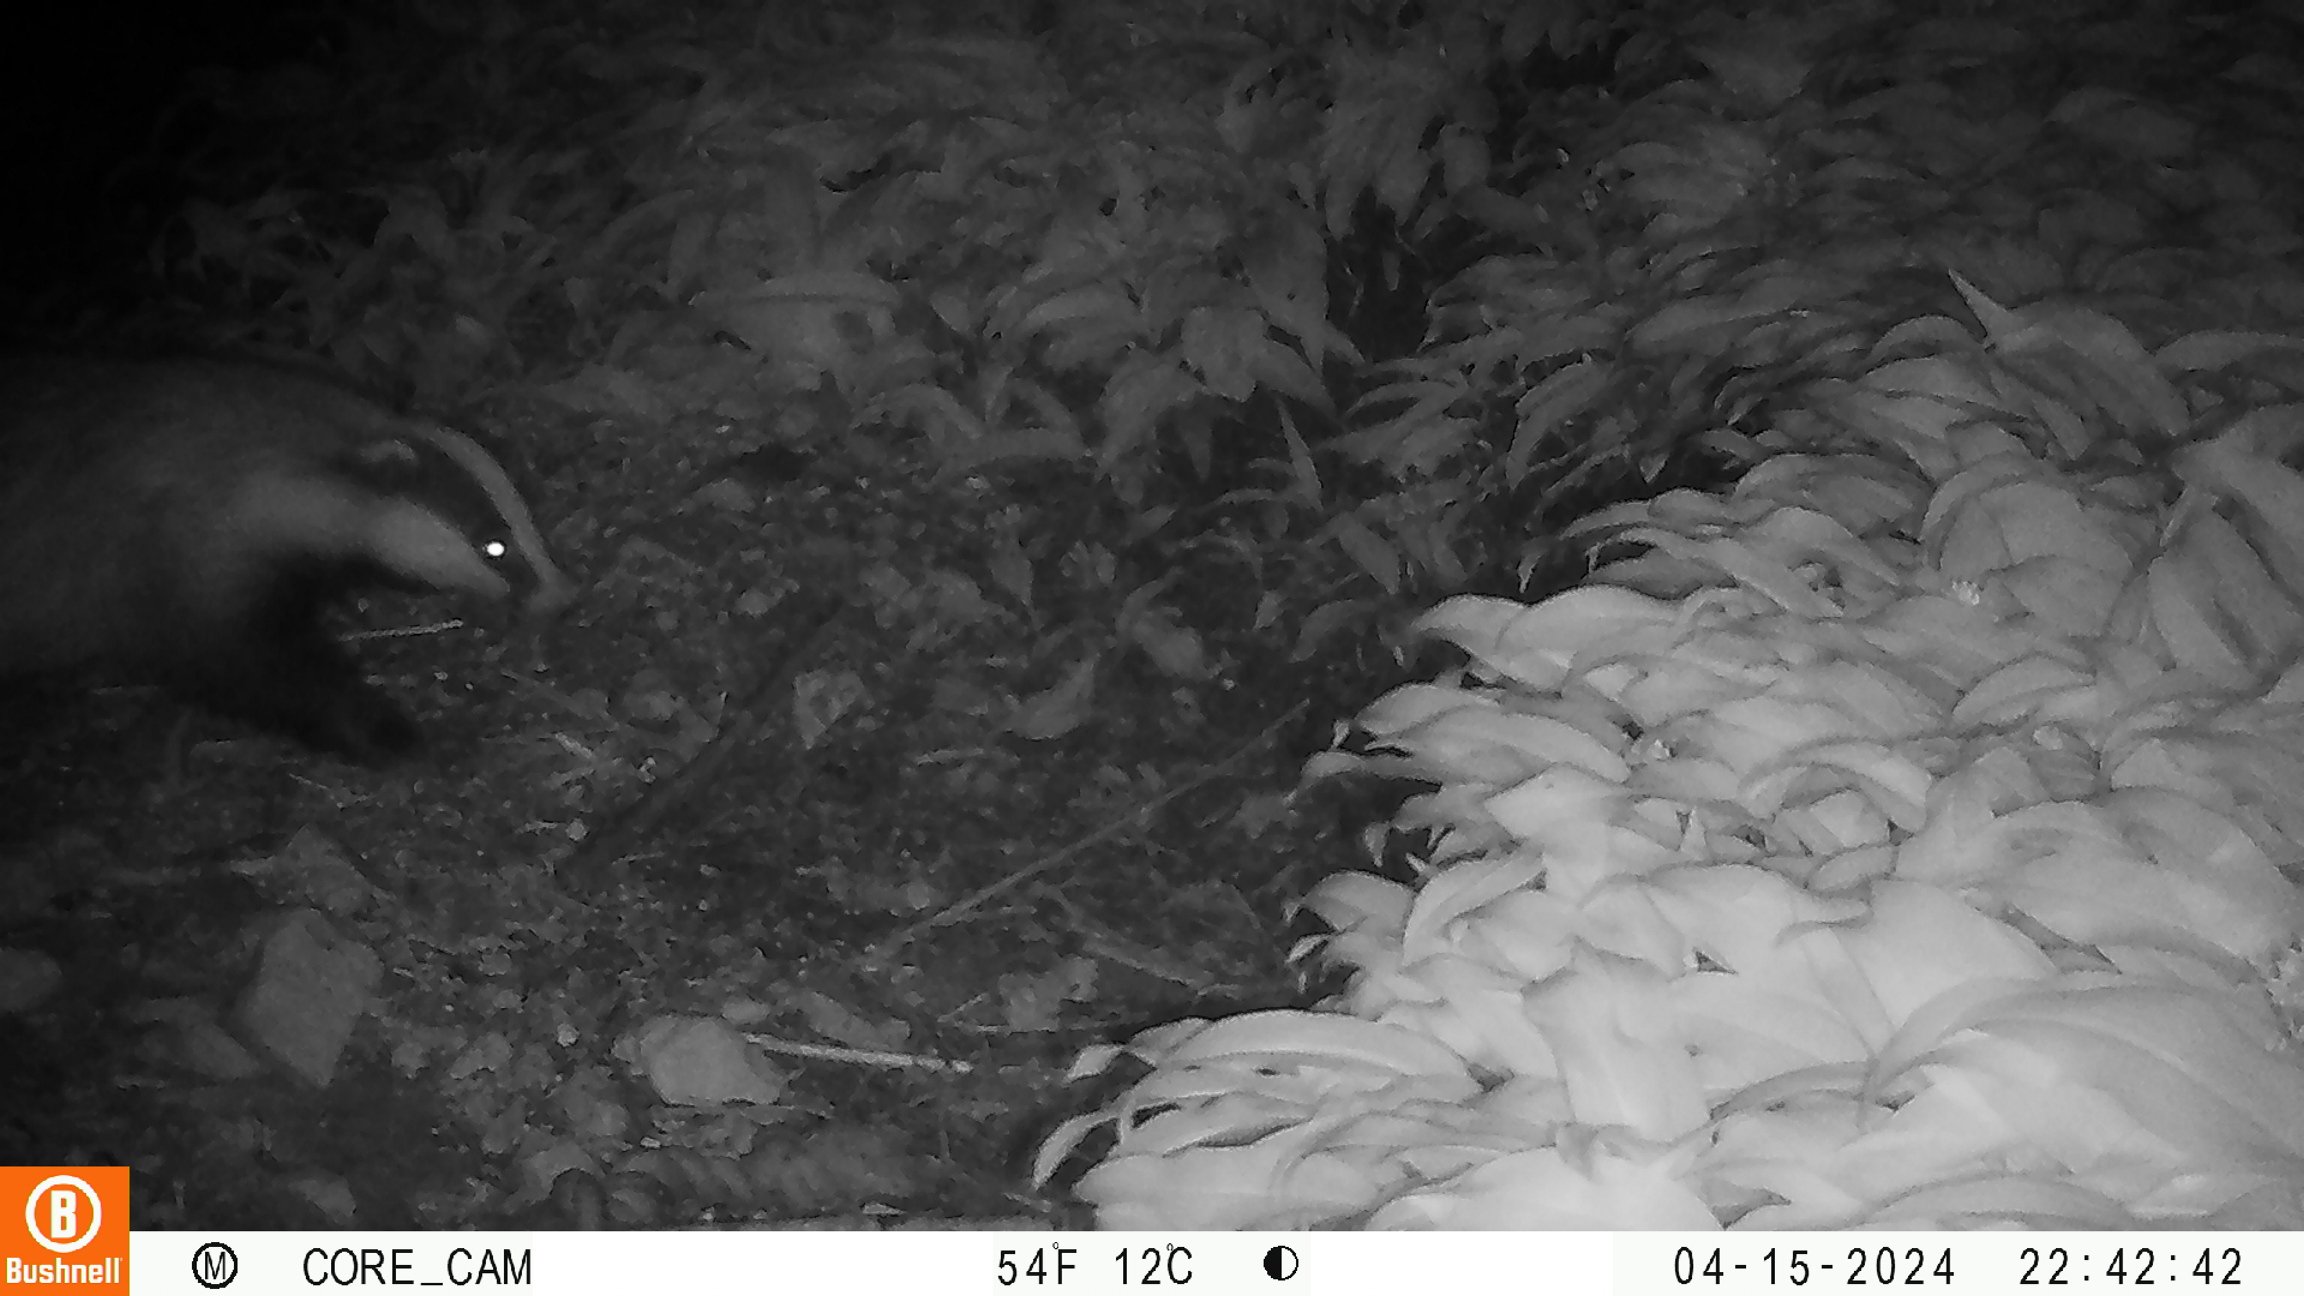 Here's one of our garden visitors, caught on the trail cam.